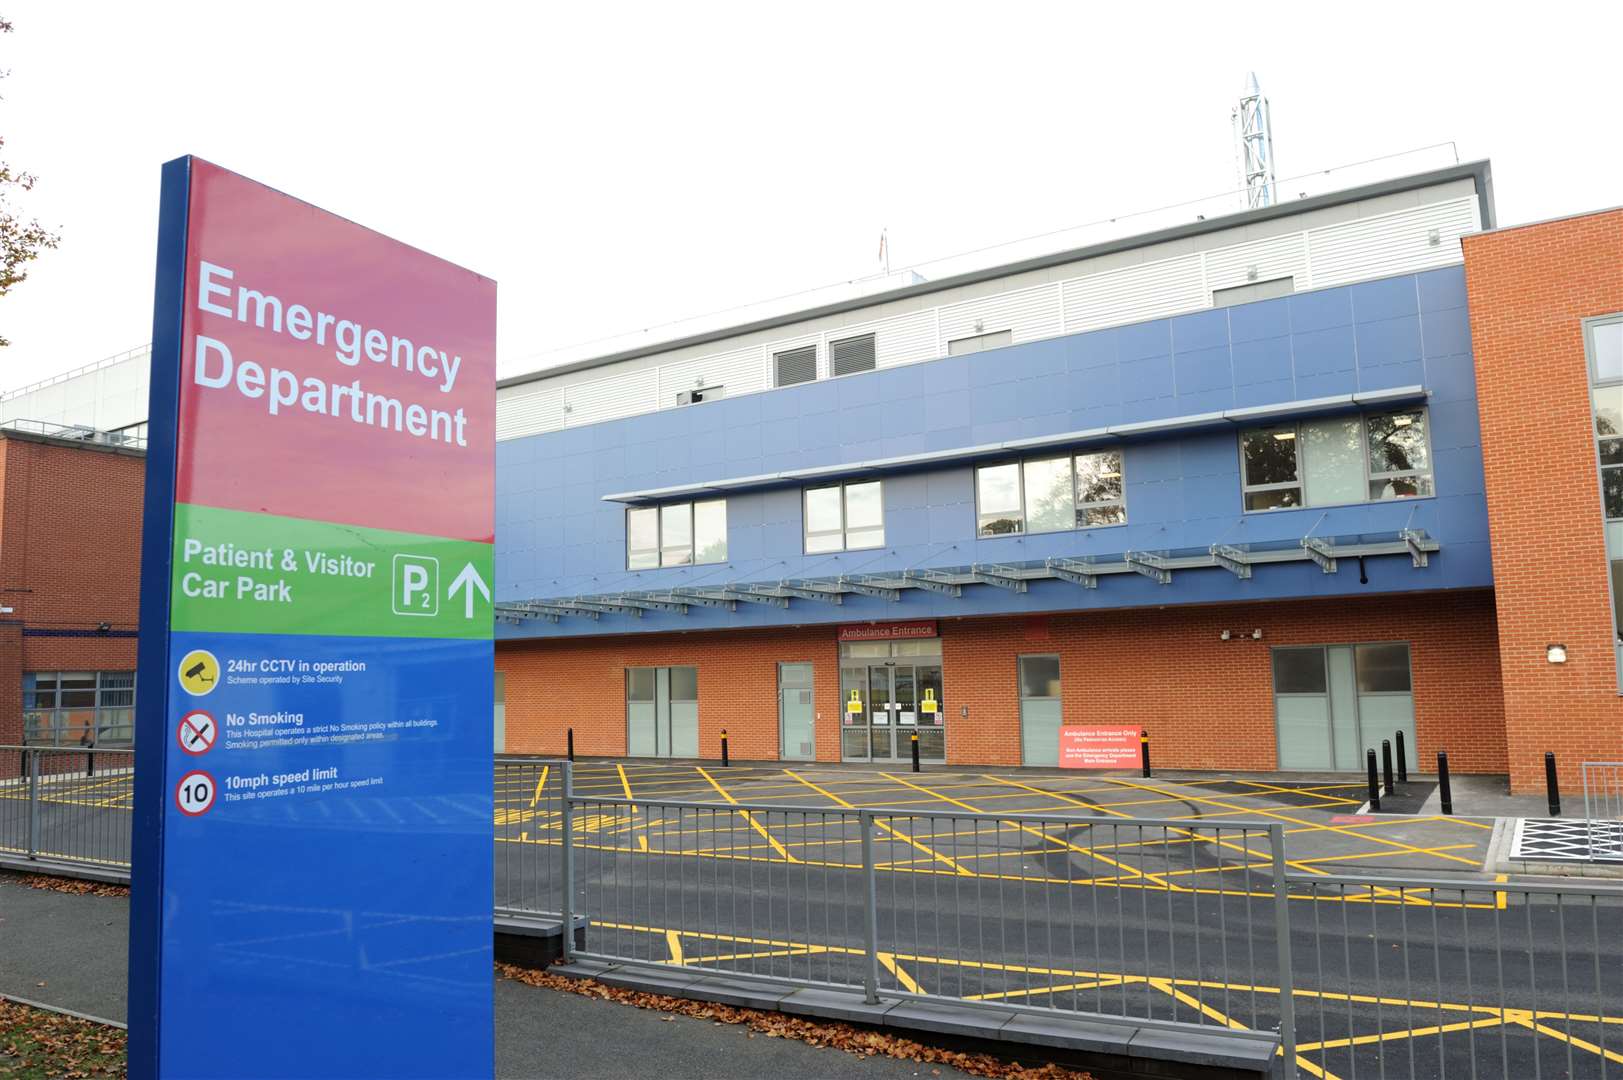 Patients complained about waiting times at the Windmill Road site